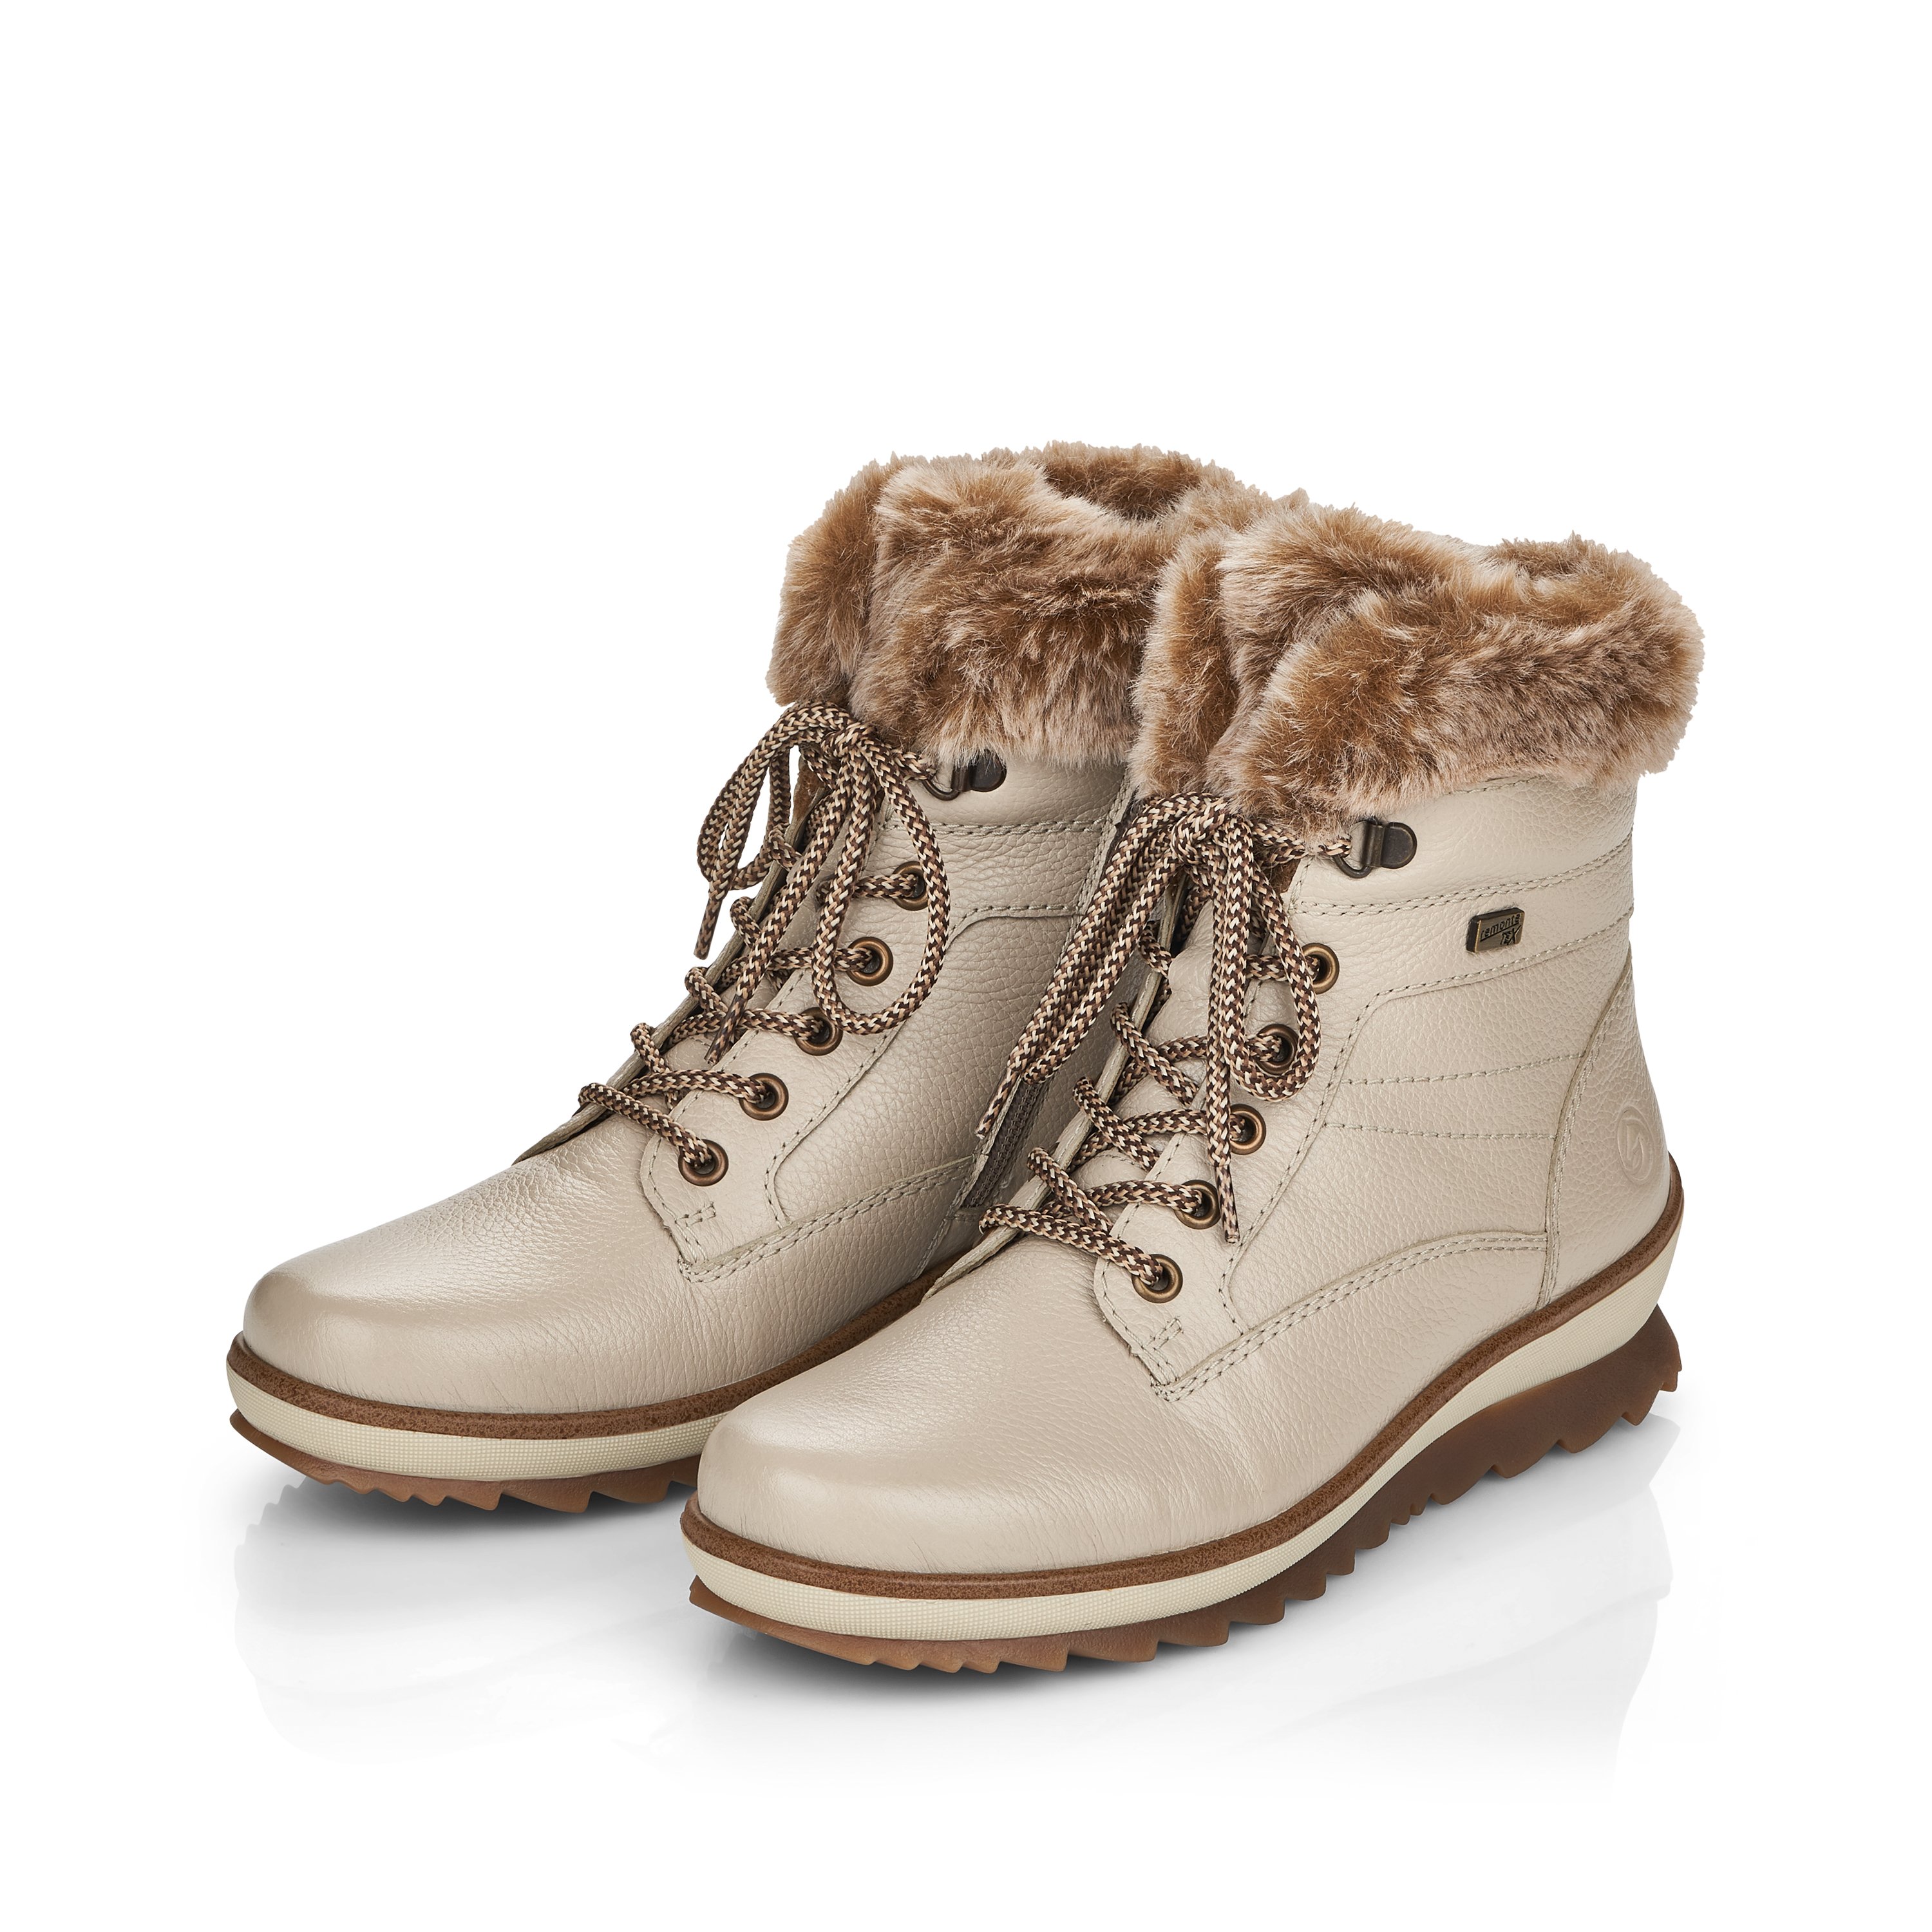 Brown beige remonte women´s lace-up boots R8477-60 with cushioning profile sole. Shoe laterally